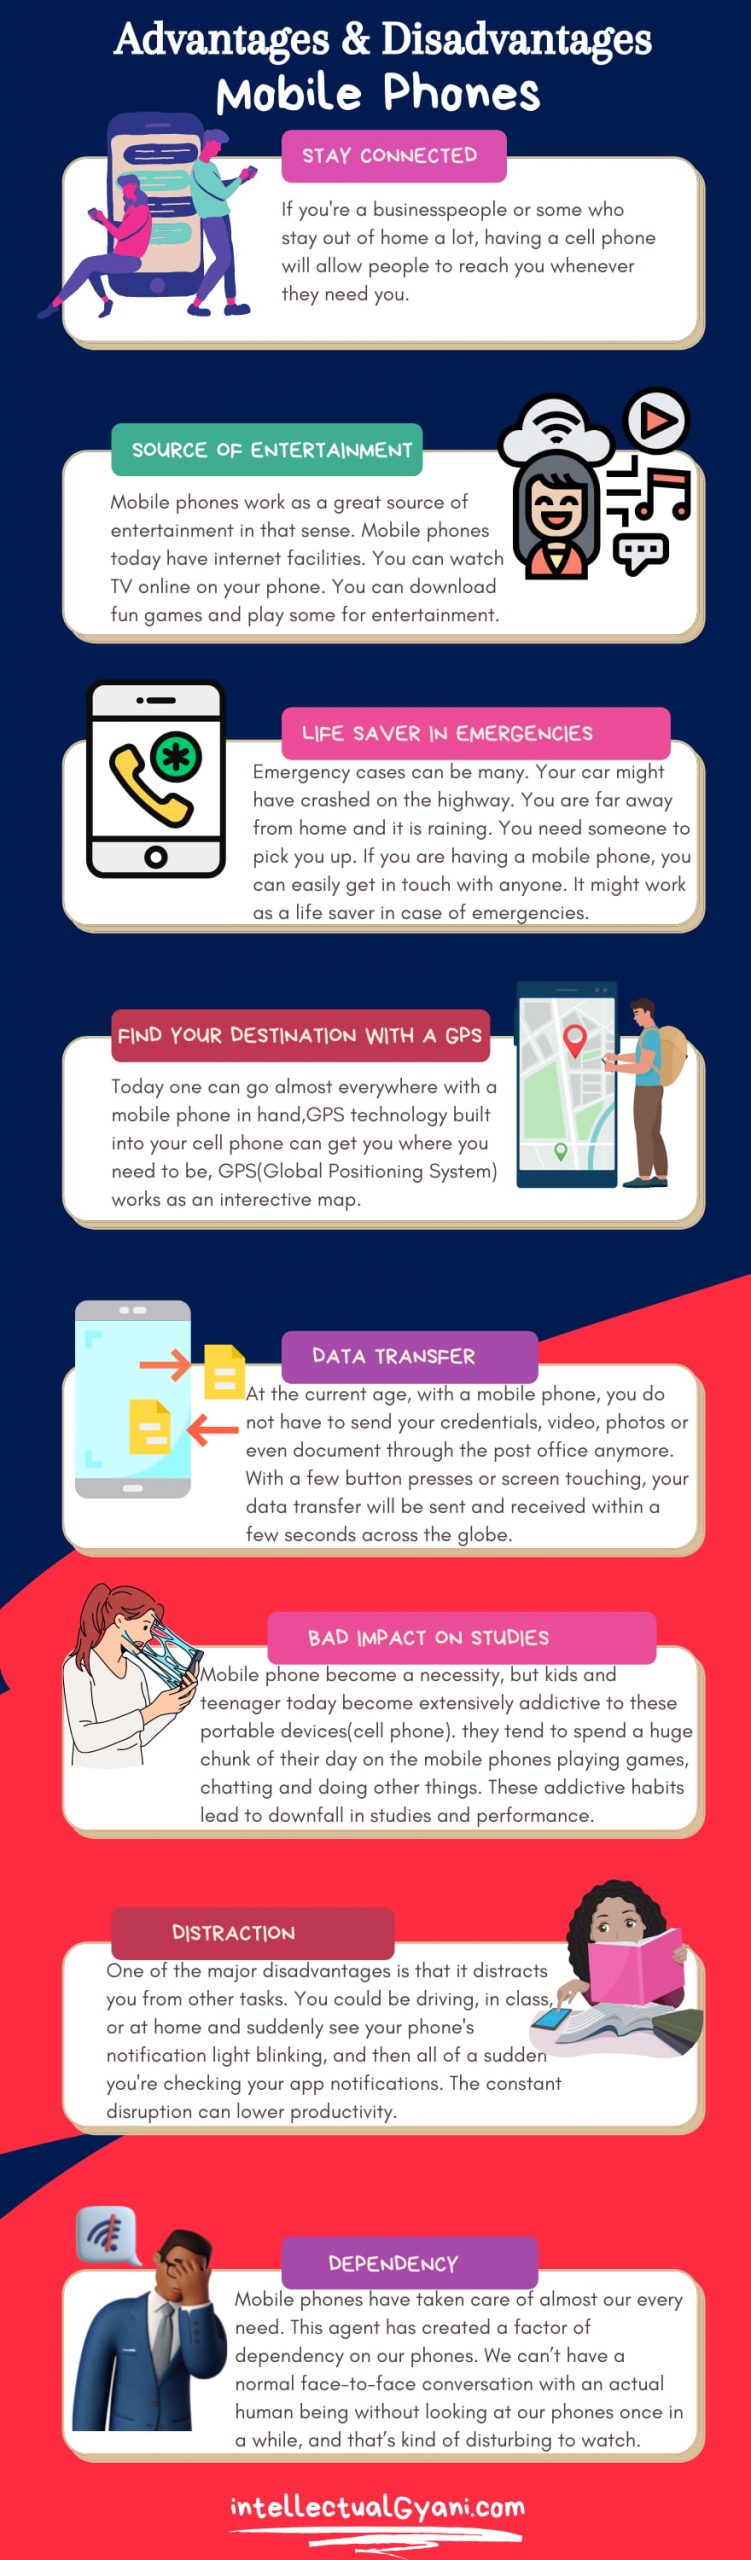 10 points of advantages and disadvantages of mobile phones